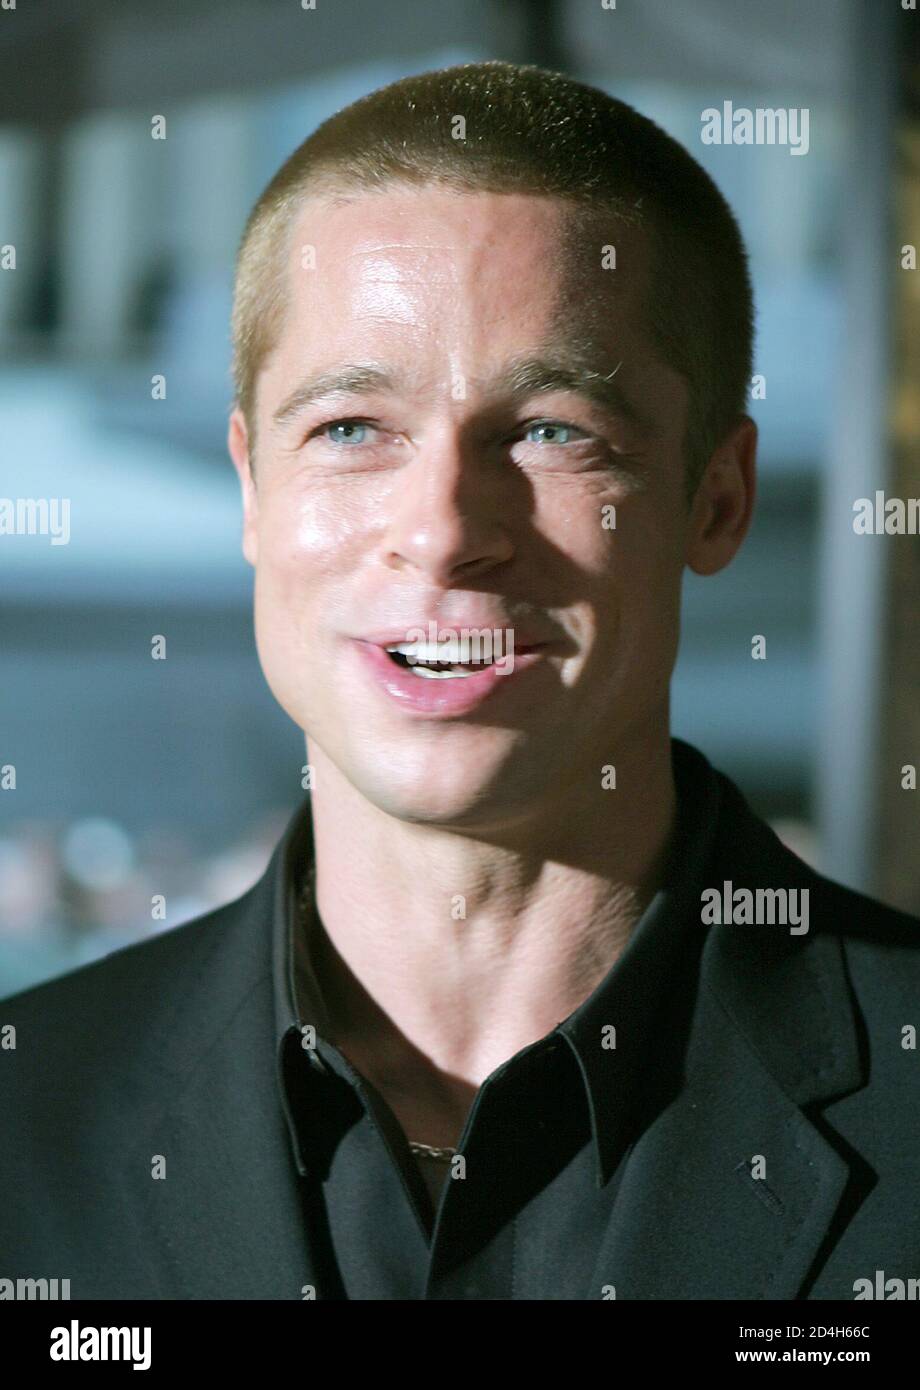 Actor Brad Pitt arrives for the premiere of his movie 'Troy' in New York  May 10, 2004. The film, based on Greek poet Homer's account of the Trojan  War, will be in